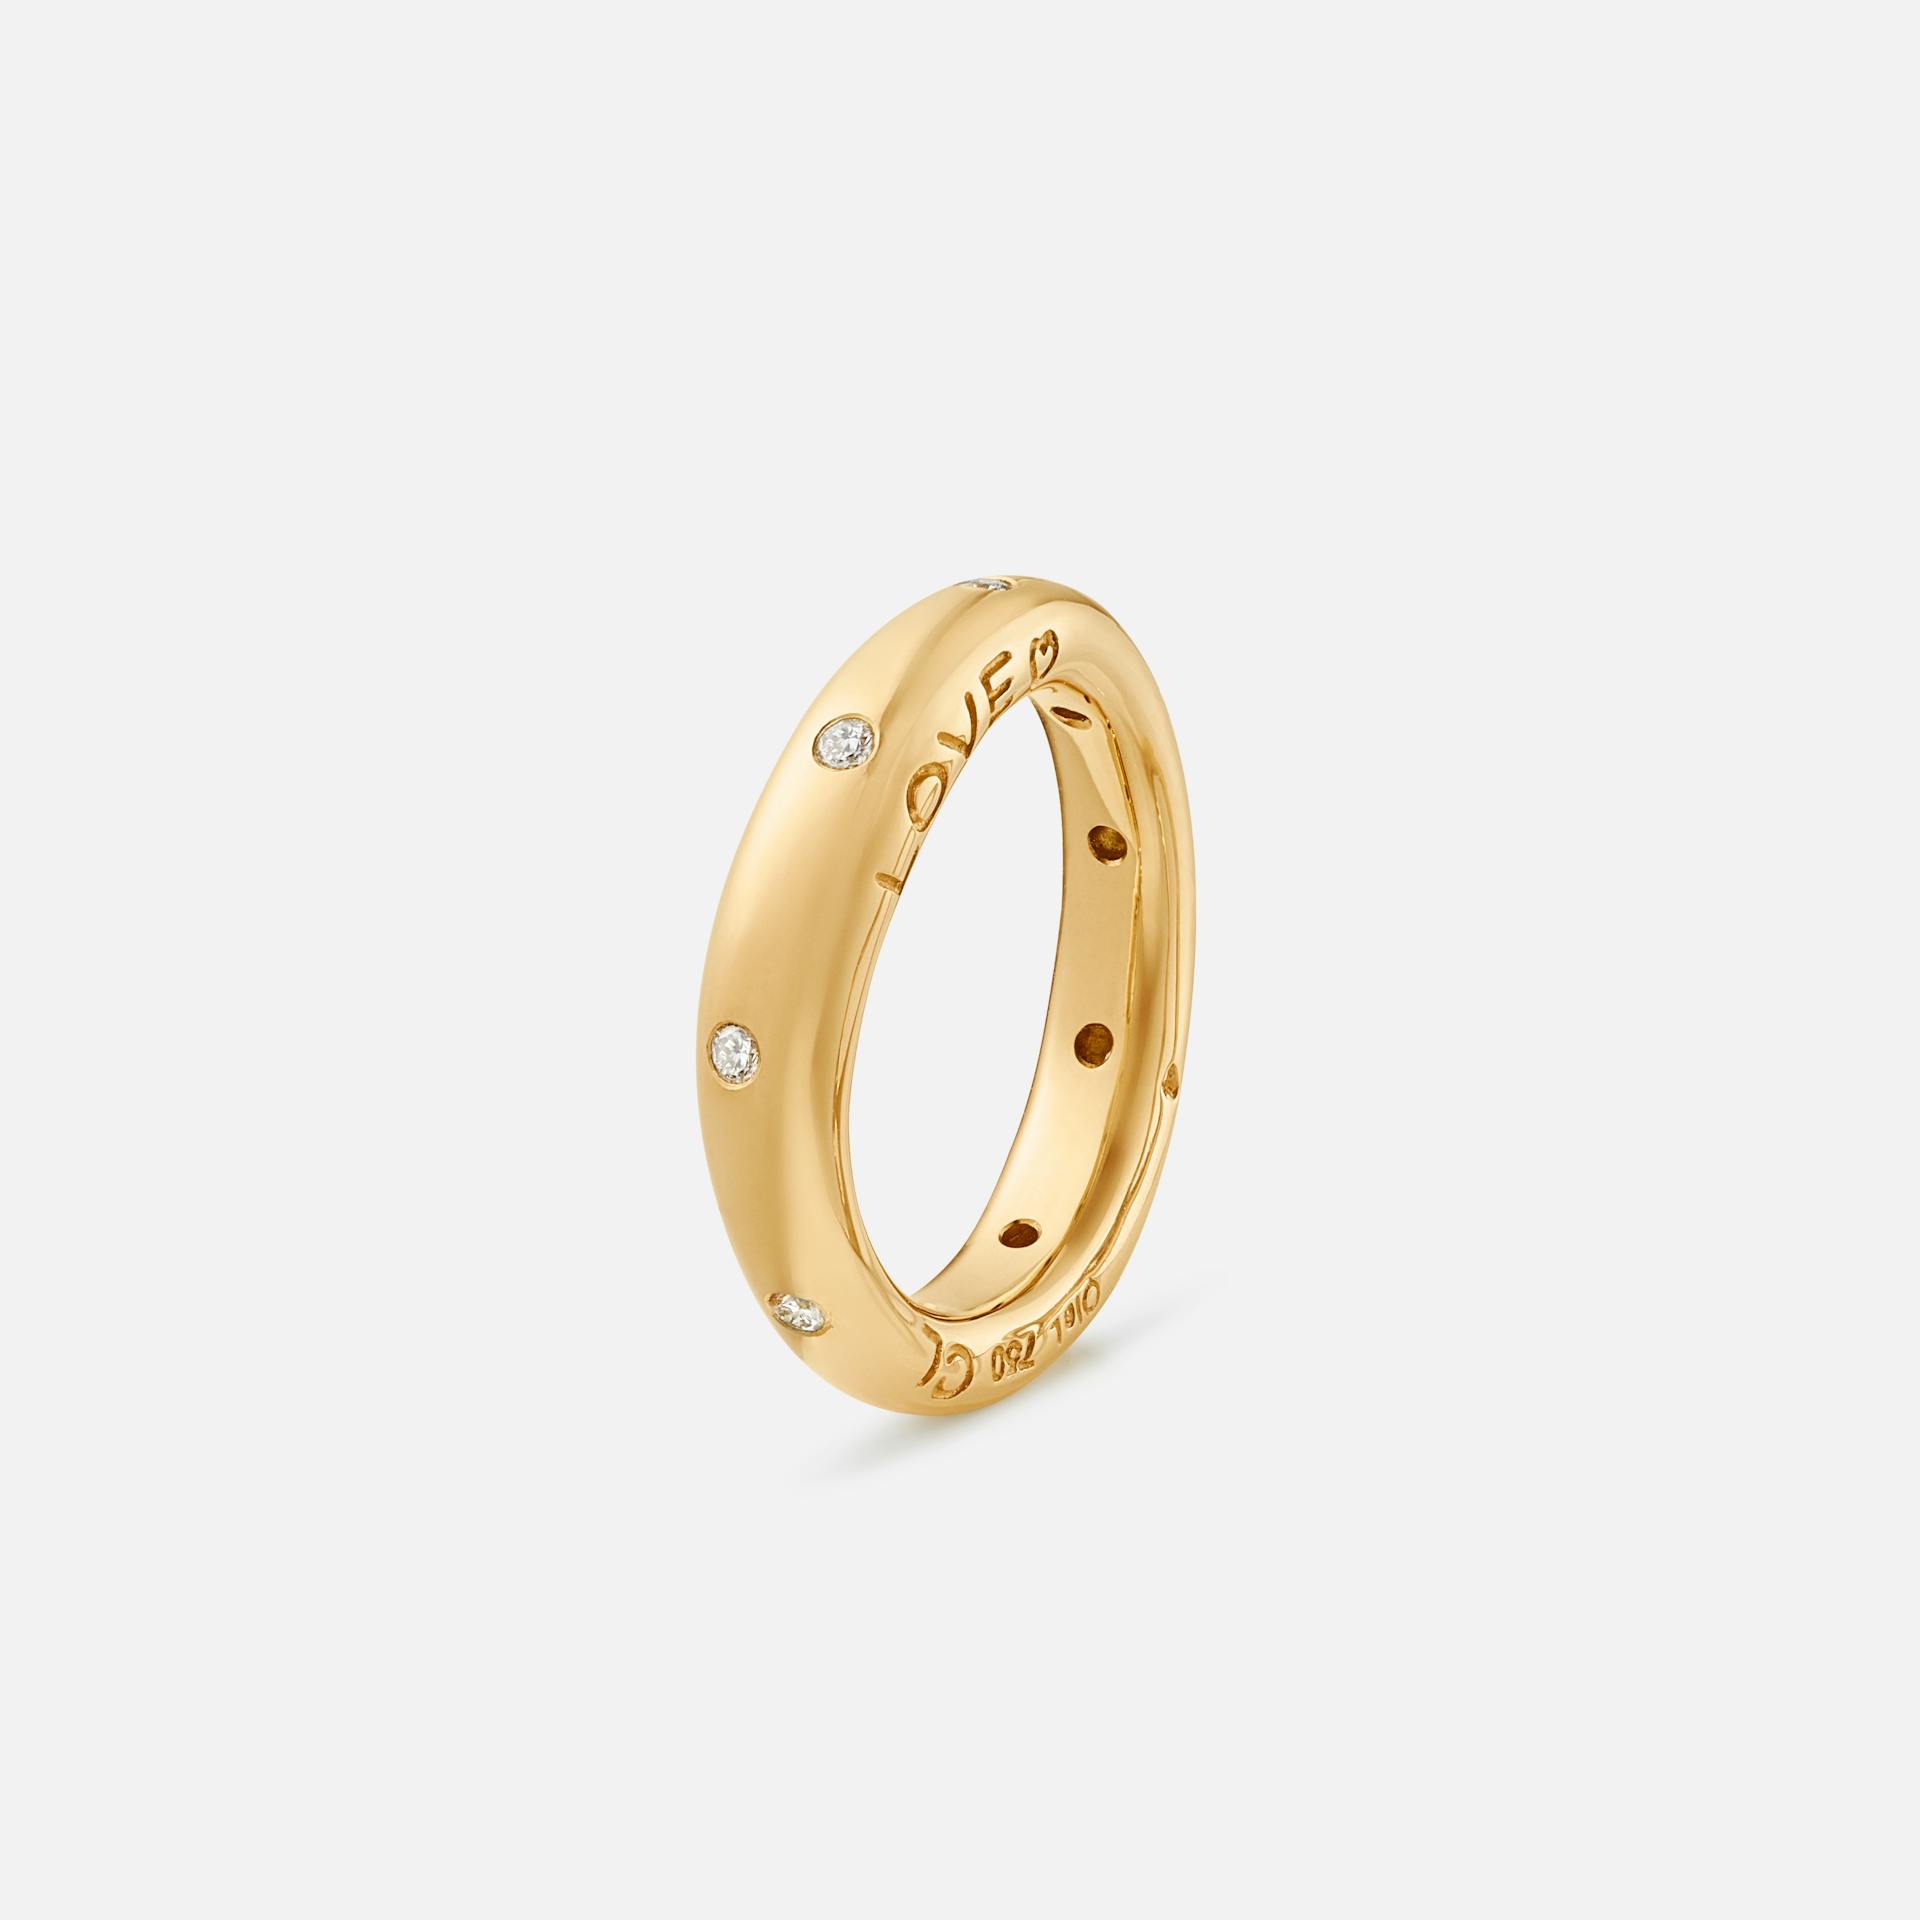 Love ring 4 18k gold polished and diamonds 0.18 ct. TW. VS.